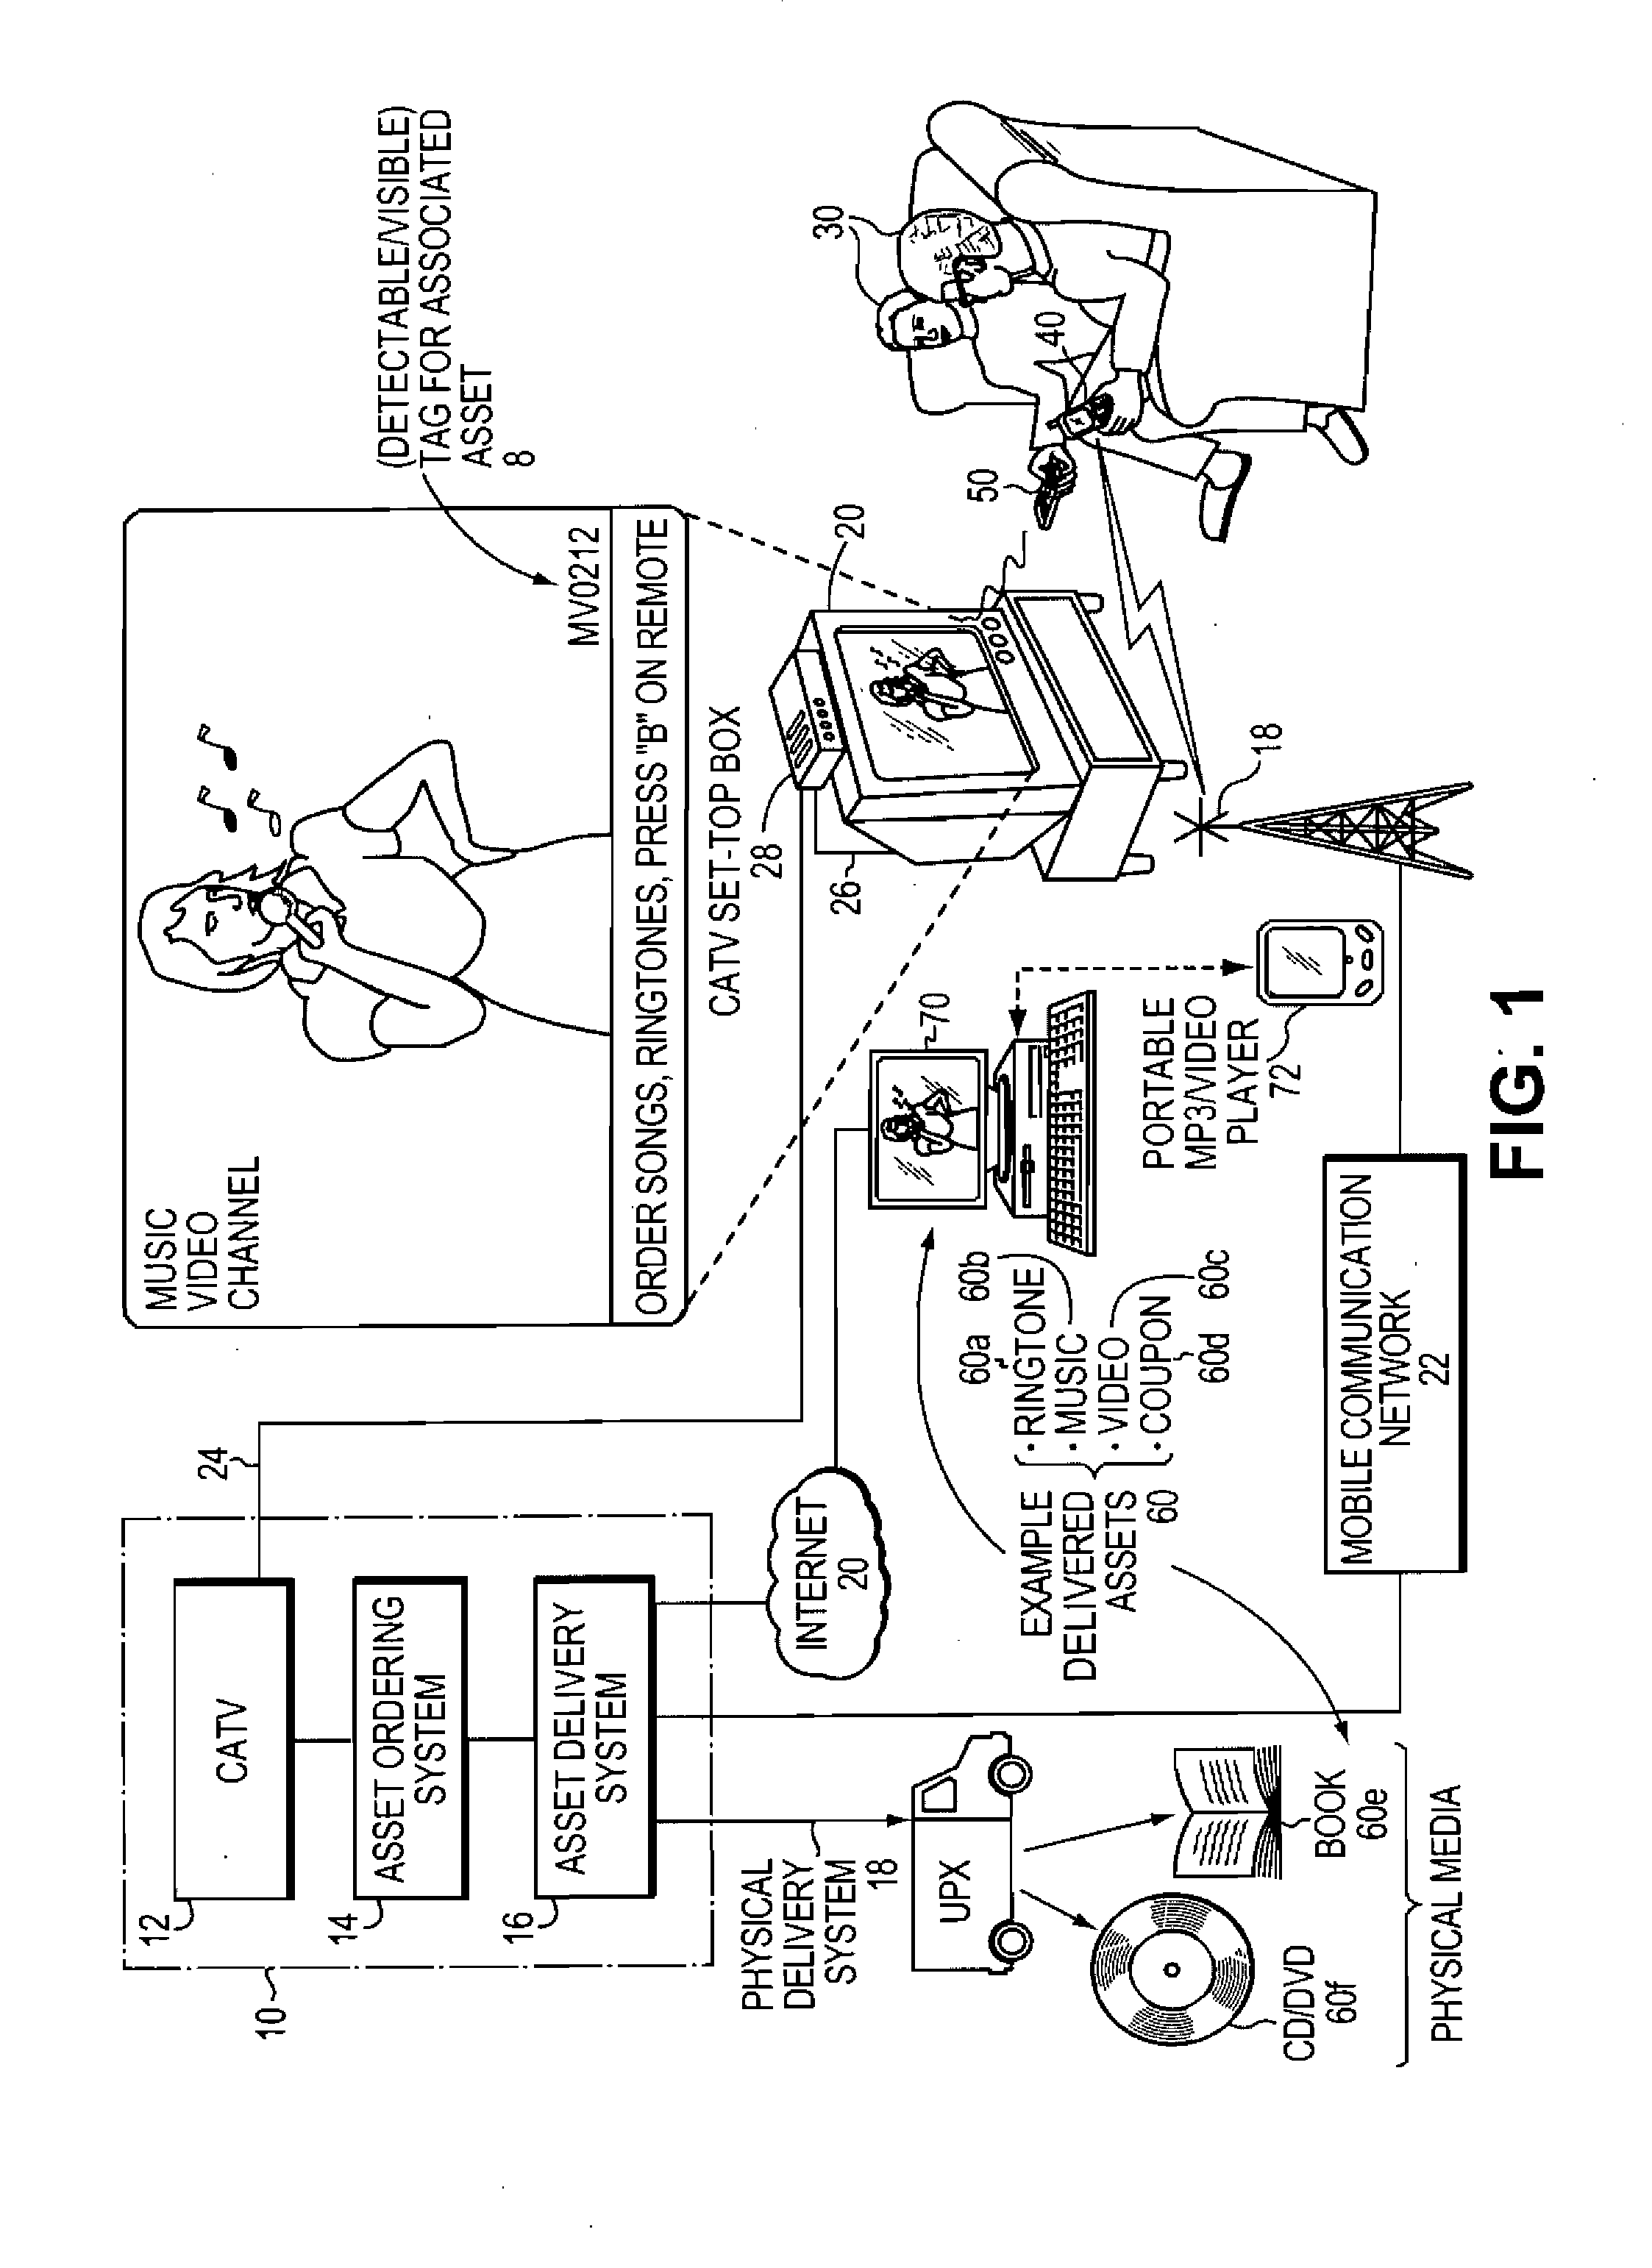 Methods and Systems For Distributing Assets Associated With Television Program